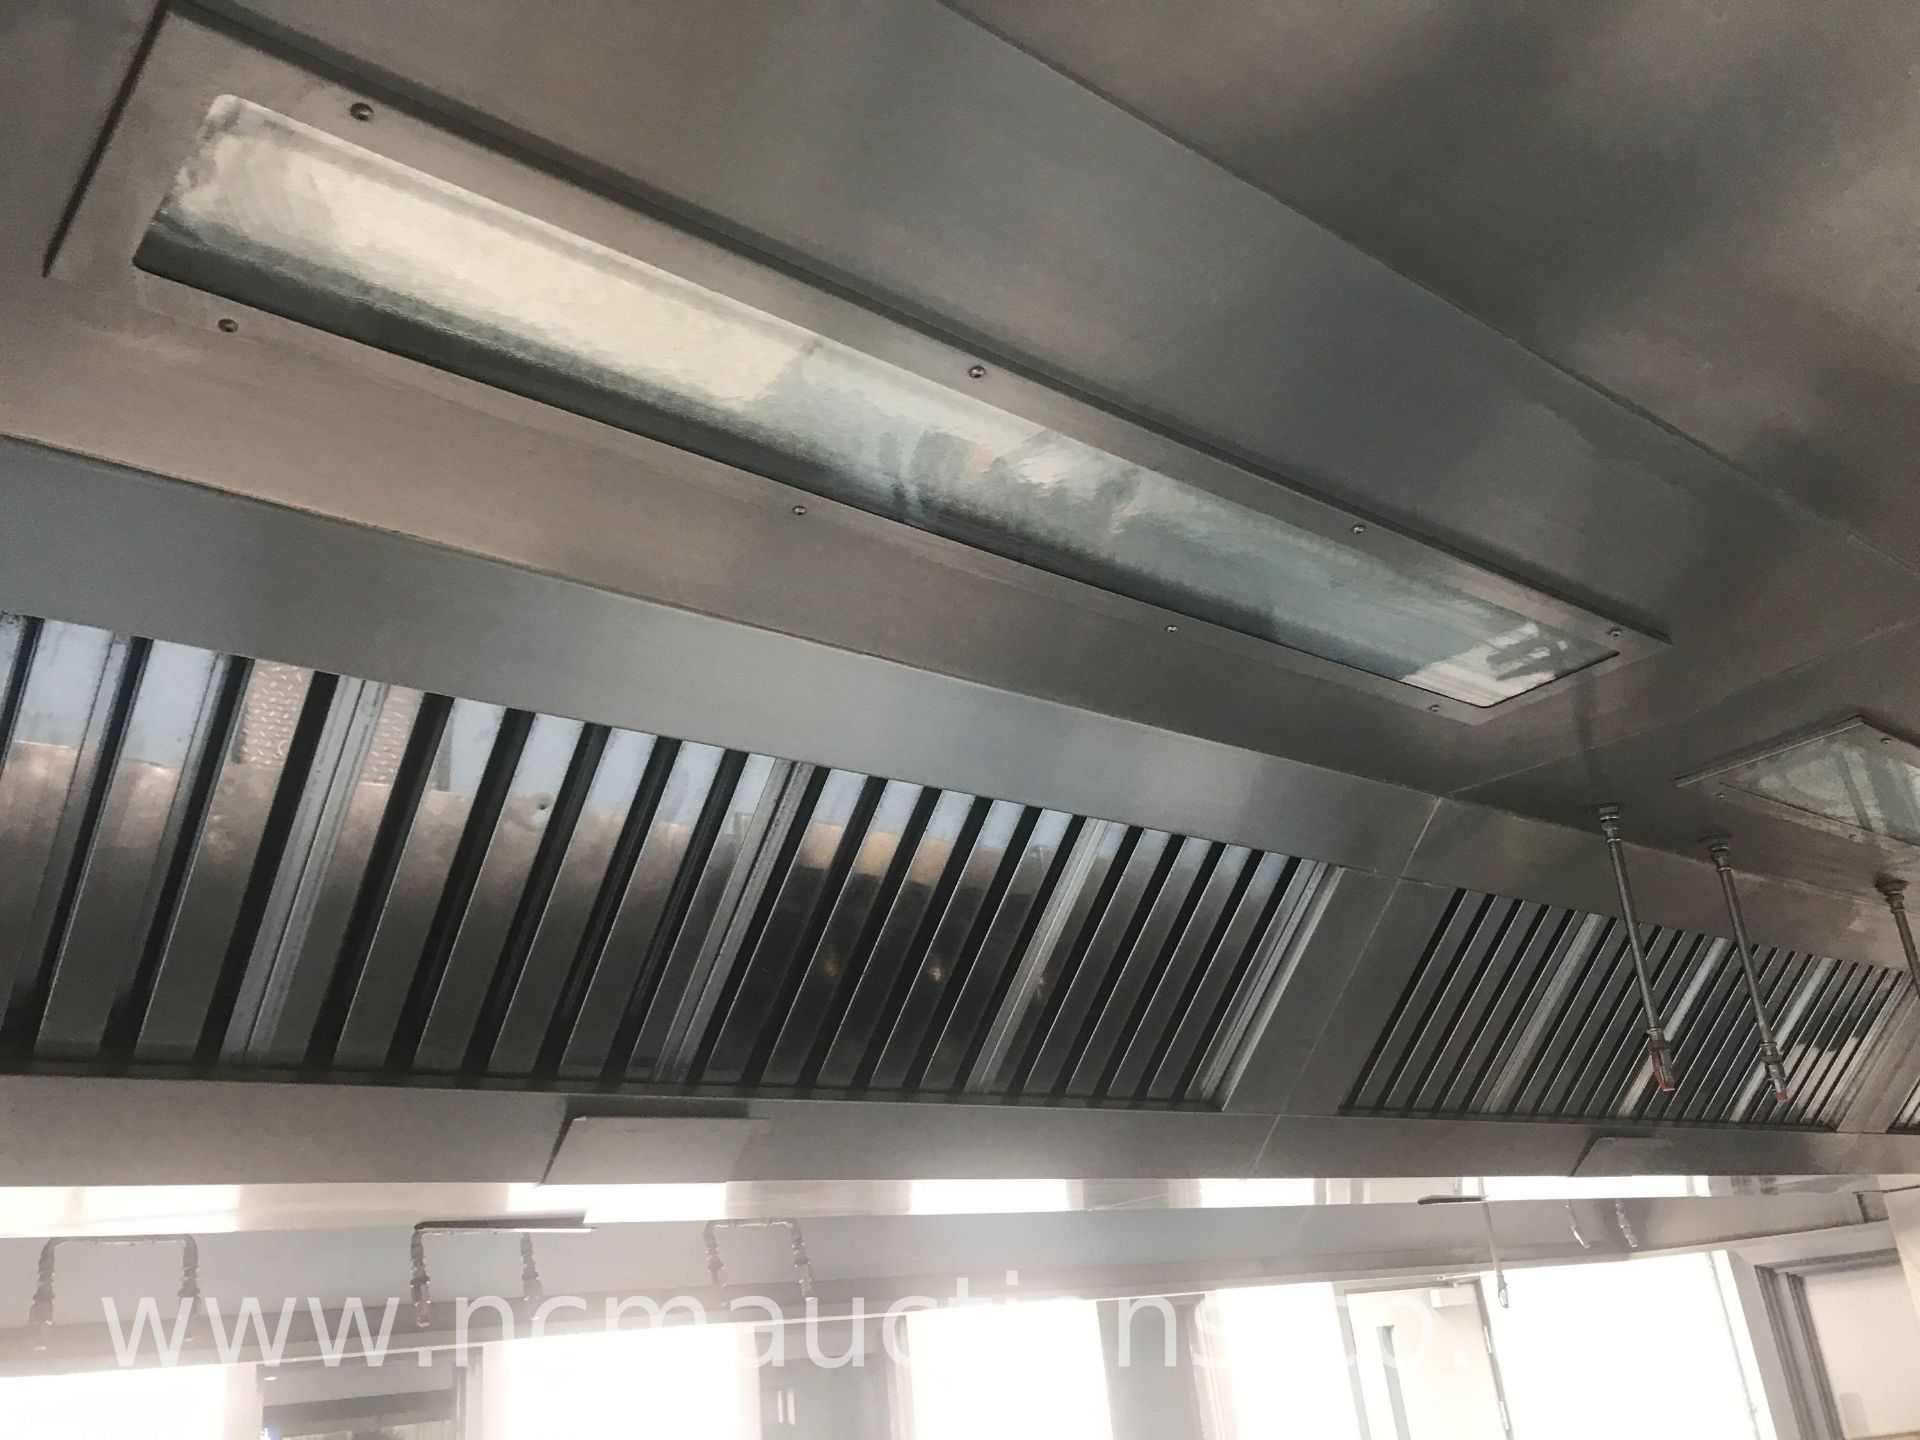 Stainless Steel Ventilation System - Image 8 of 16